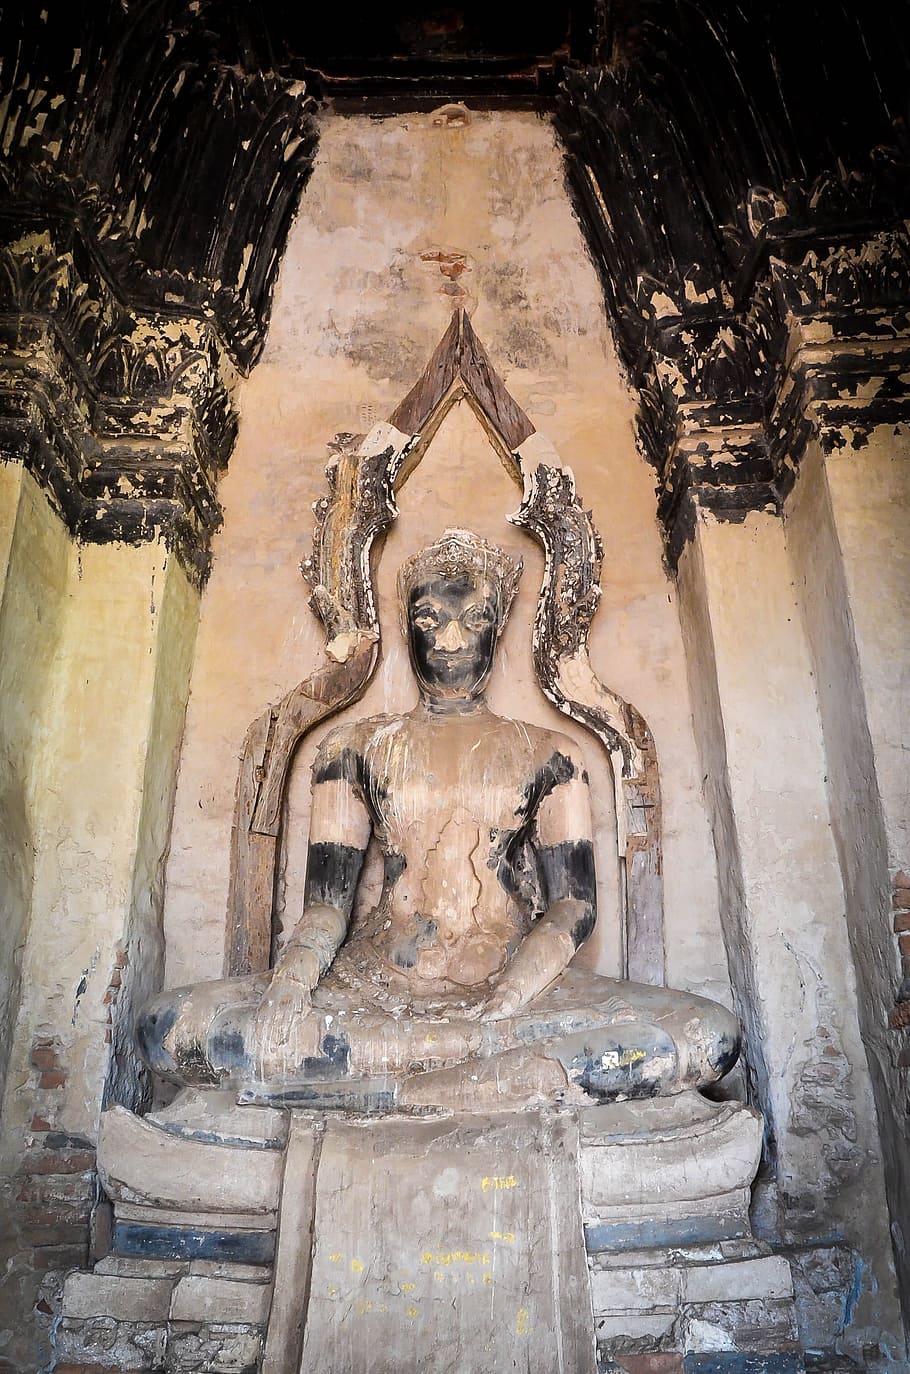 Buddha Statue in Crumbling Ruins, buddhism, religion, asia, asian